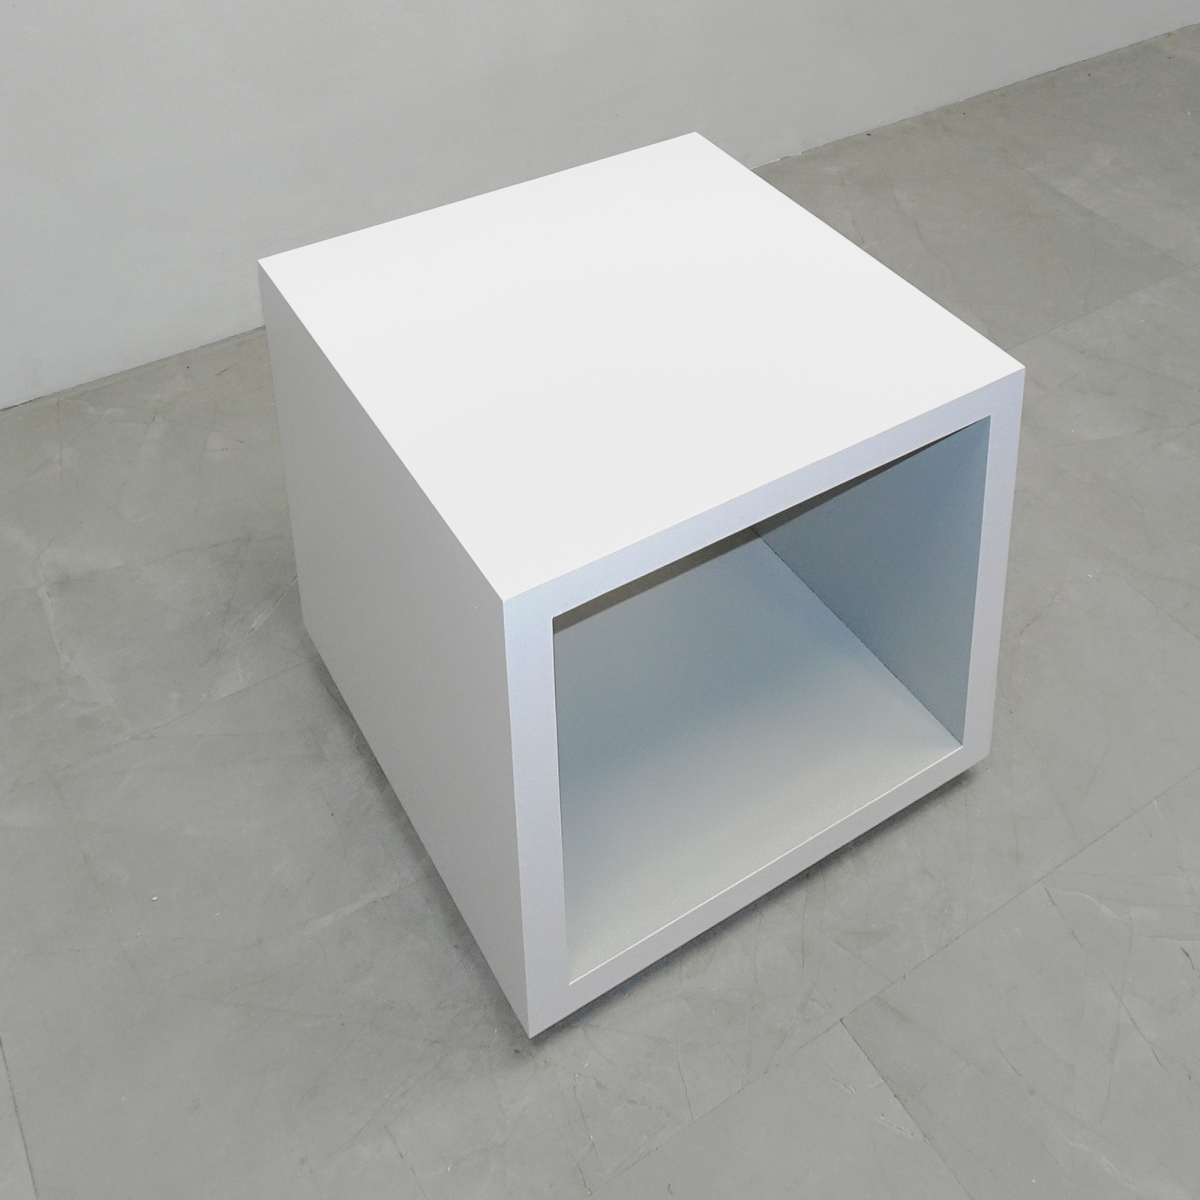 20 in. Axis Cubby Side Table - Stock # 1001-S